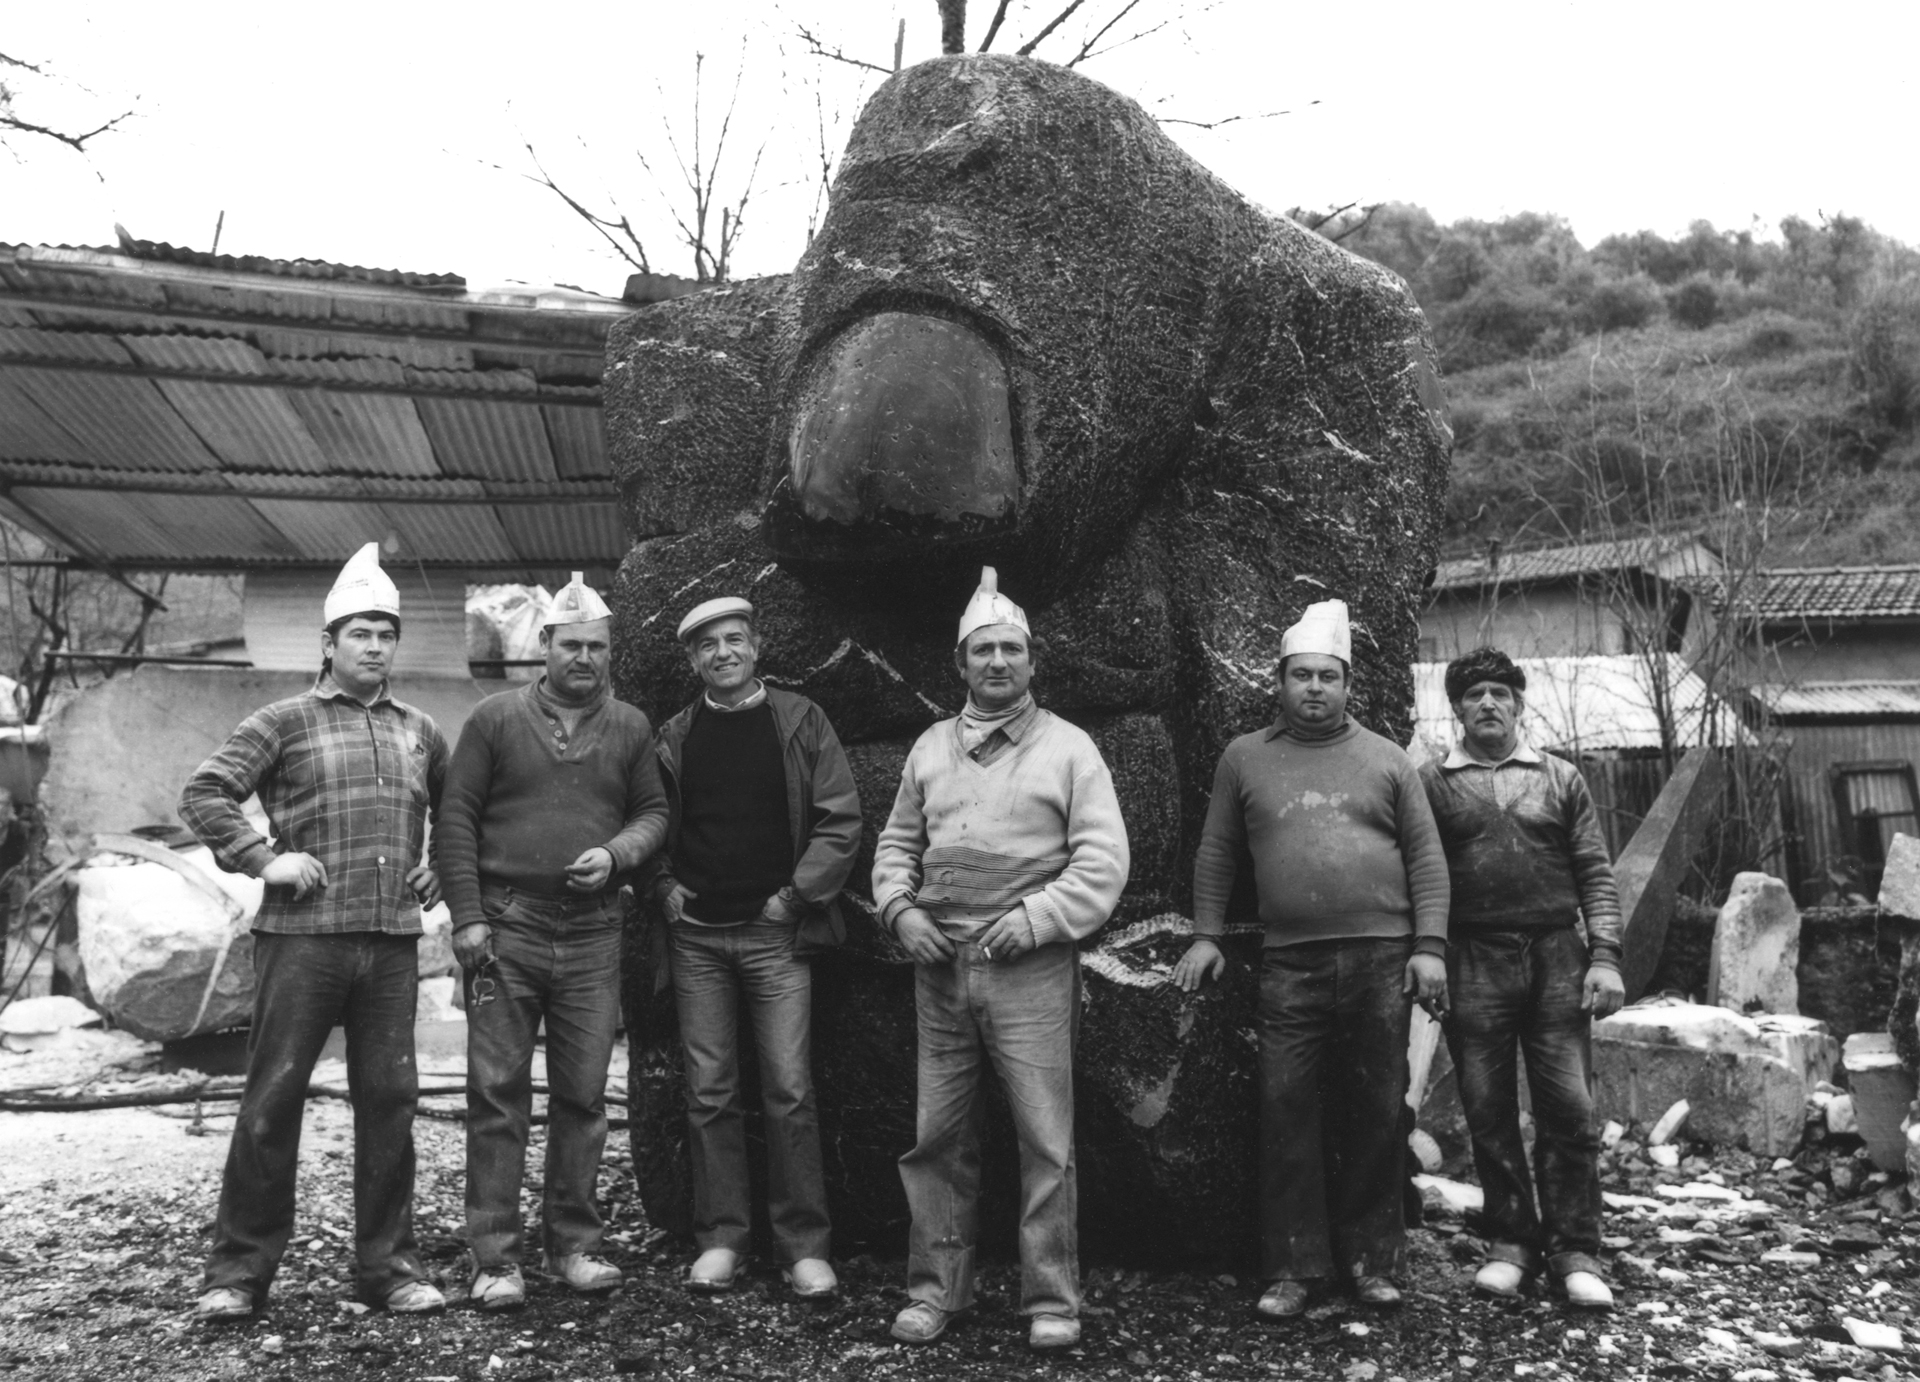 Black and white group photo. Six men with caps stand in a row in front of a stone sculpture.